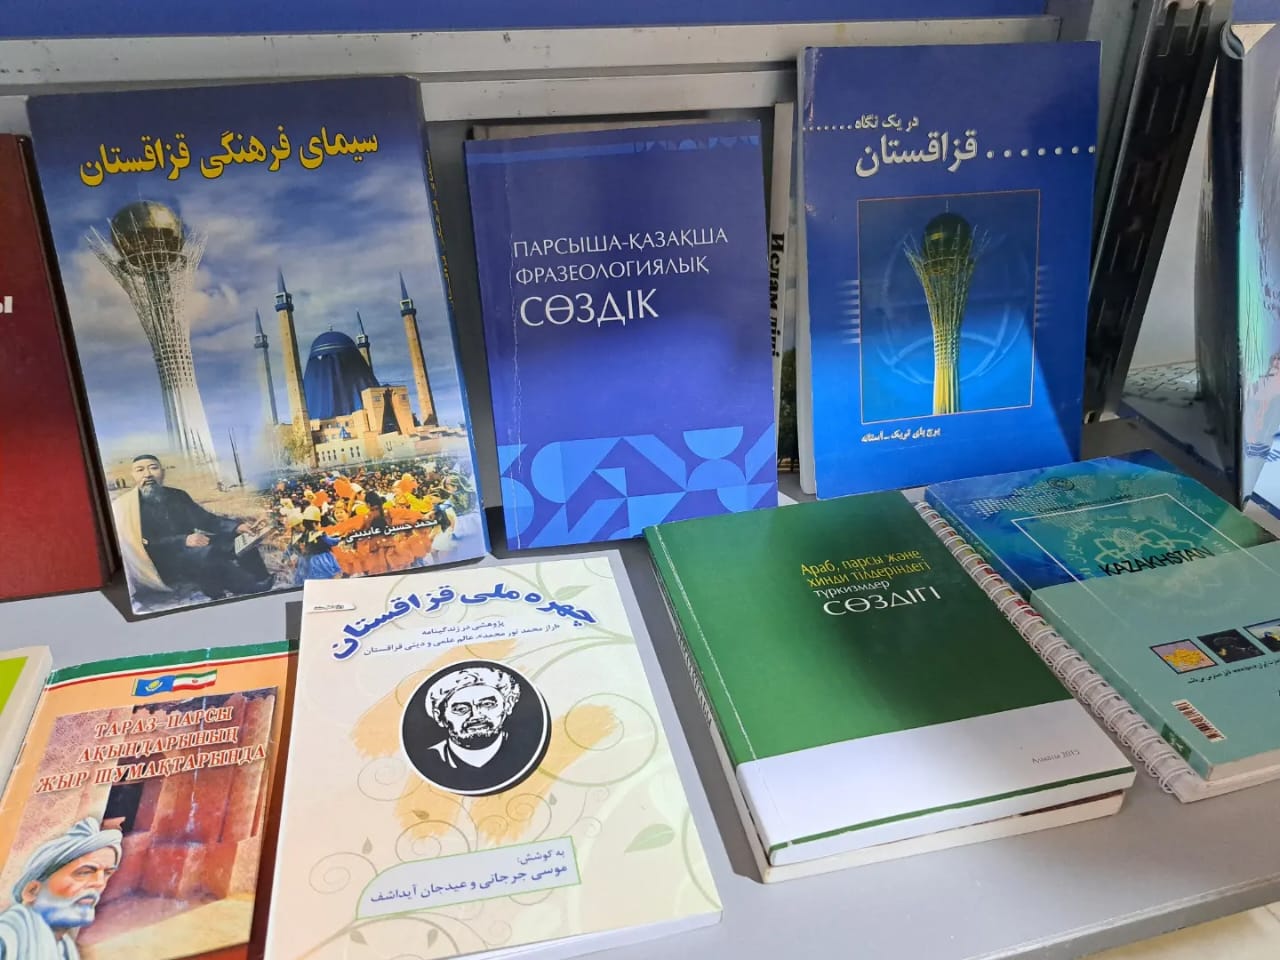 Books published by publishing house “Qazaq Universiteti” at the book exhibition in Iran